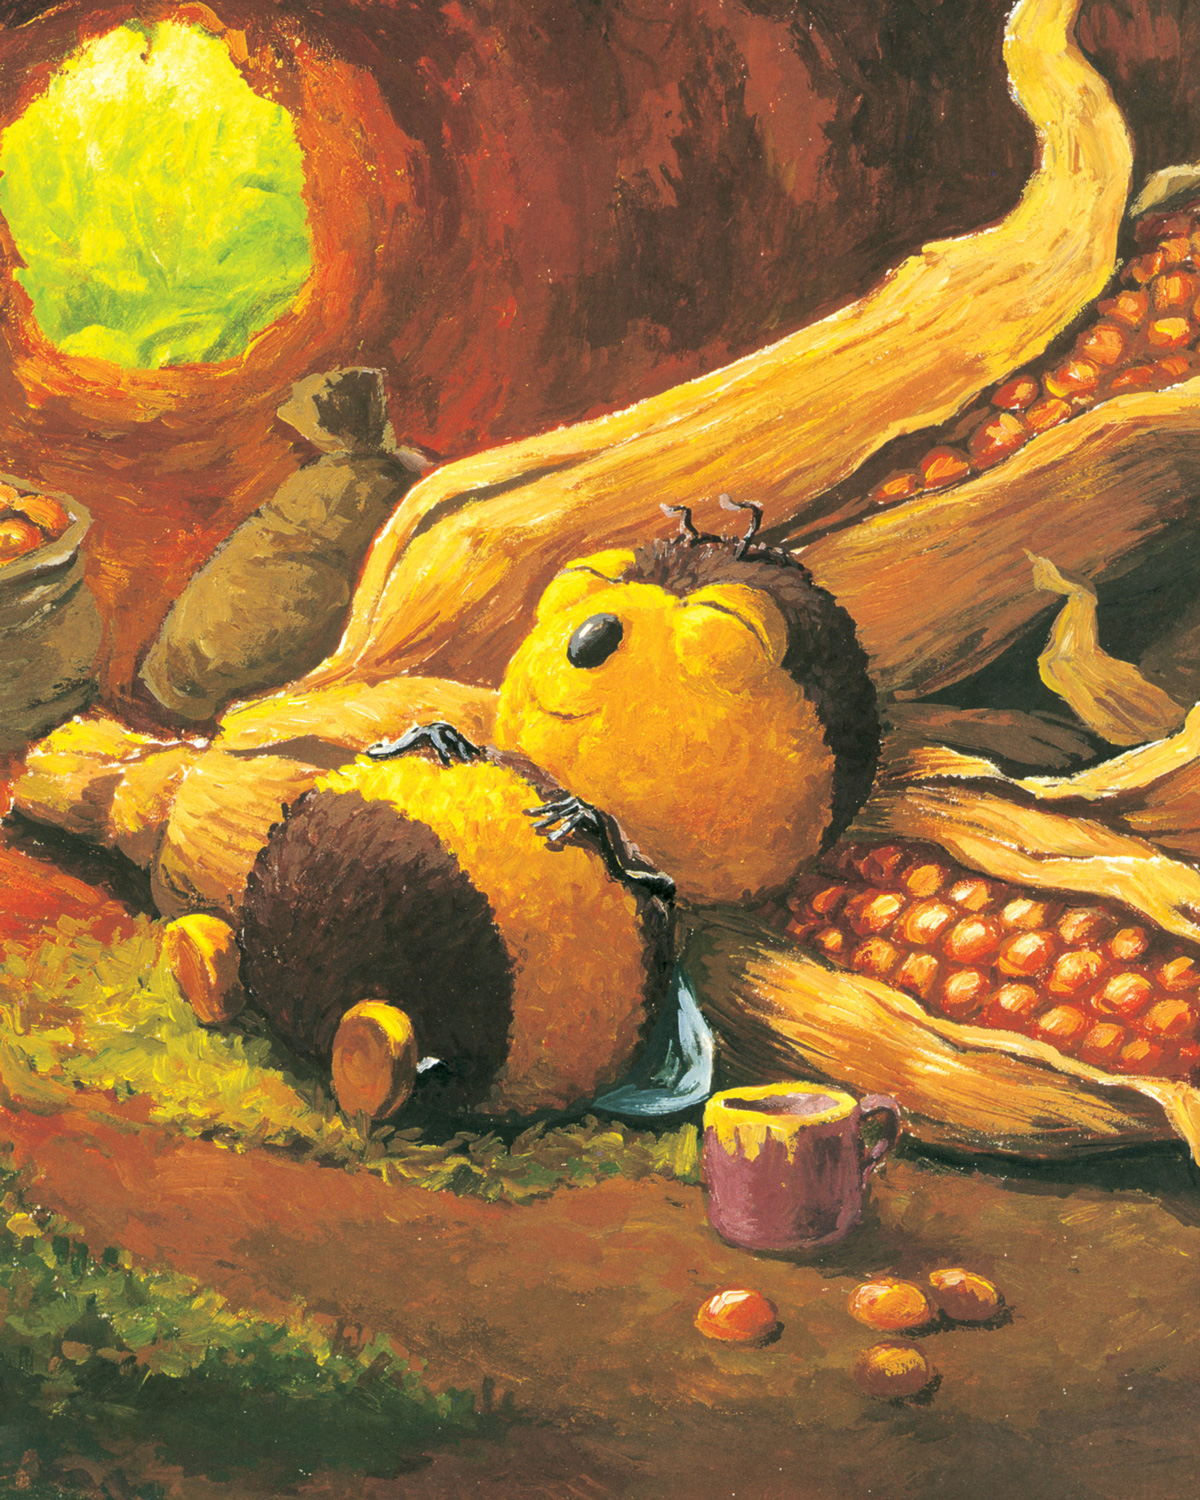 Illustration by Antoon Krings, from Les recettes des Drôles de Petites
Bêtes, 2005. The drawing of Léon the Bumblebee accompanies a recipe for a
corn and popcorn soup consisting of canned corn warmed in butter to which is
added milk, cream, and salt, and then finished with caramelized popcorn. One
might wish to note the visual relation between the popcorn and the form of
Léon, the very image of the satisfied gourmand. Courtesy Gallimard Jeunesse.